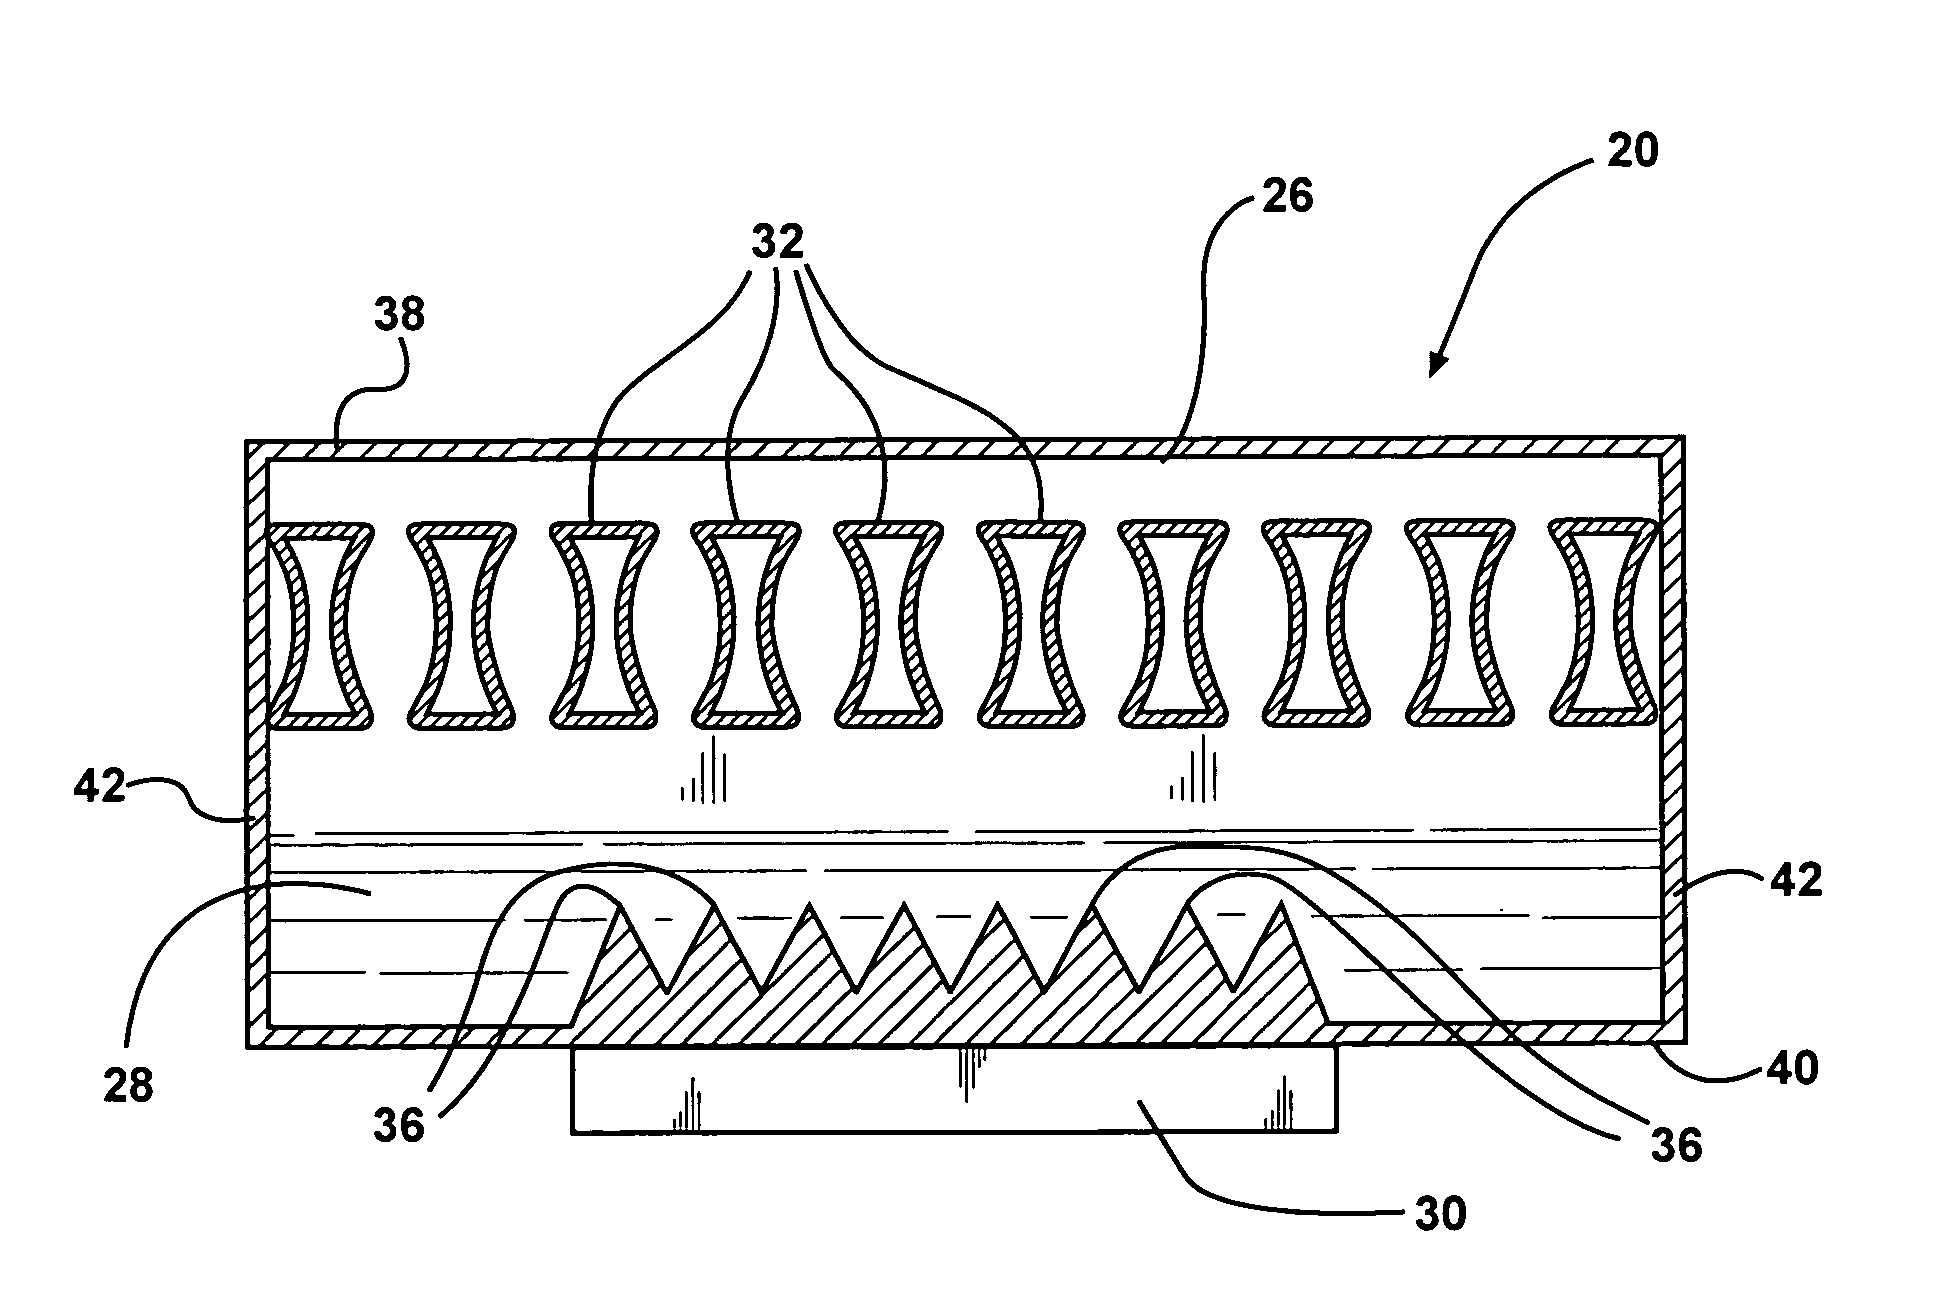 Liquid cooled thermosiphon with flexible coolant tubes